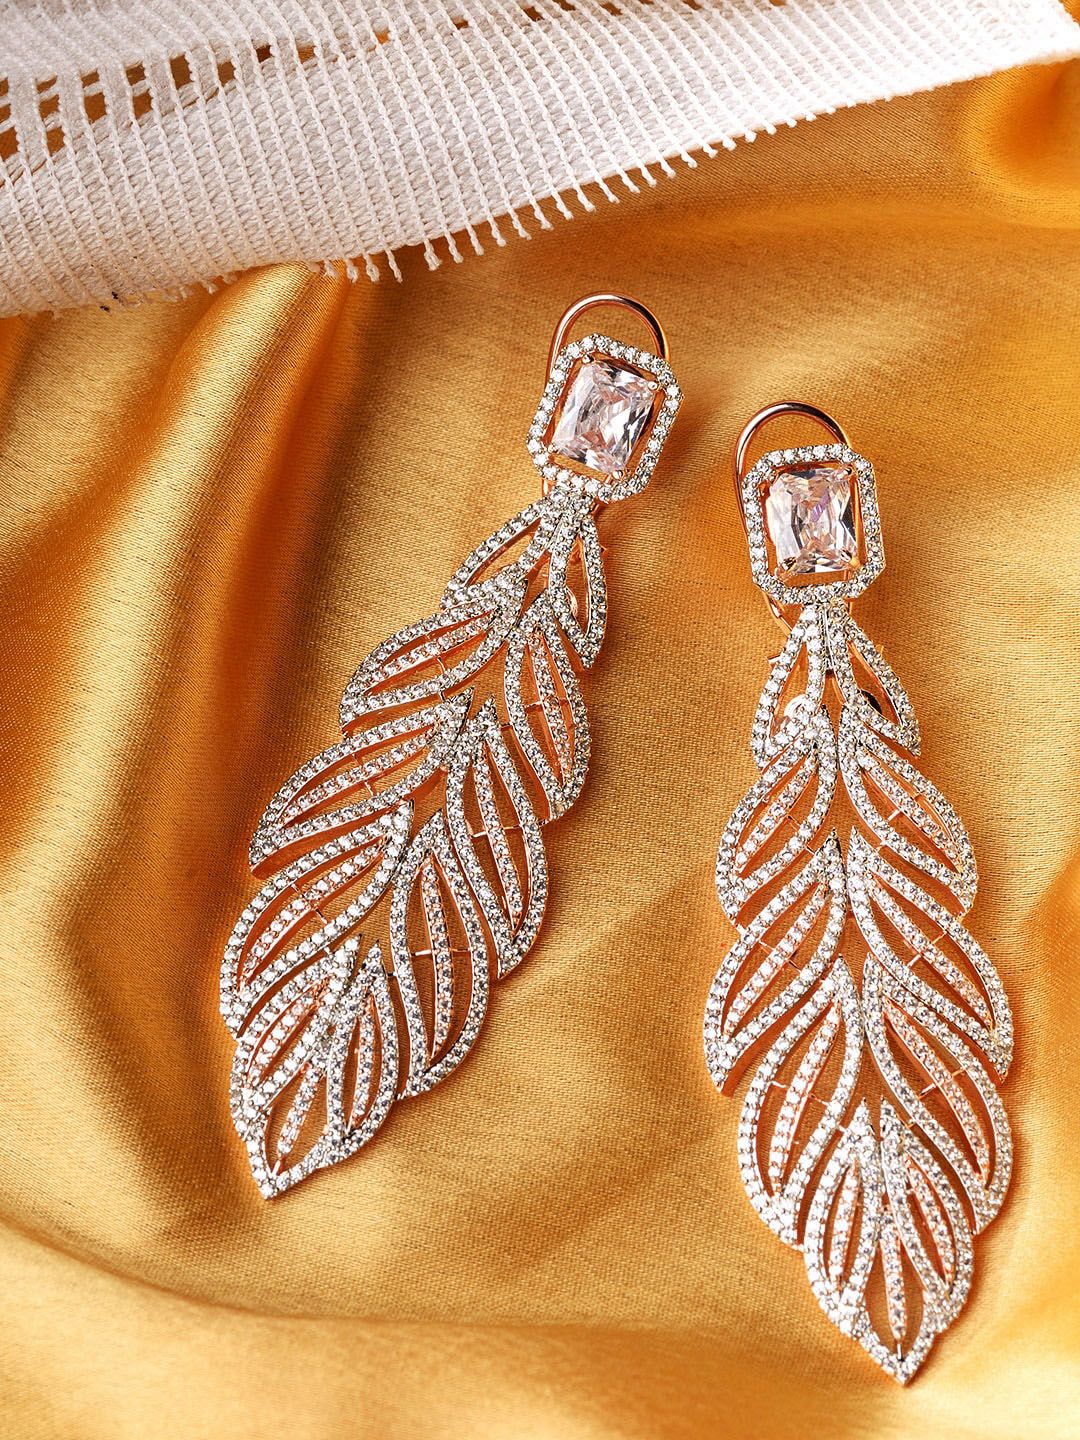 Saraf RS Jewellery White & Rose Gold-Plated AD Feather Shaped Drop Earrings Price in India